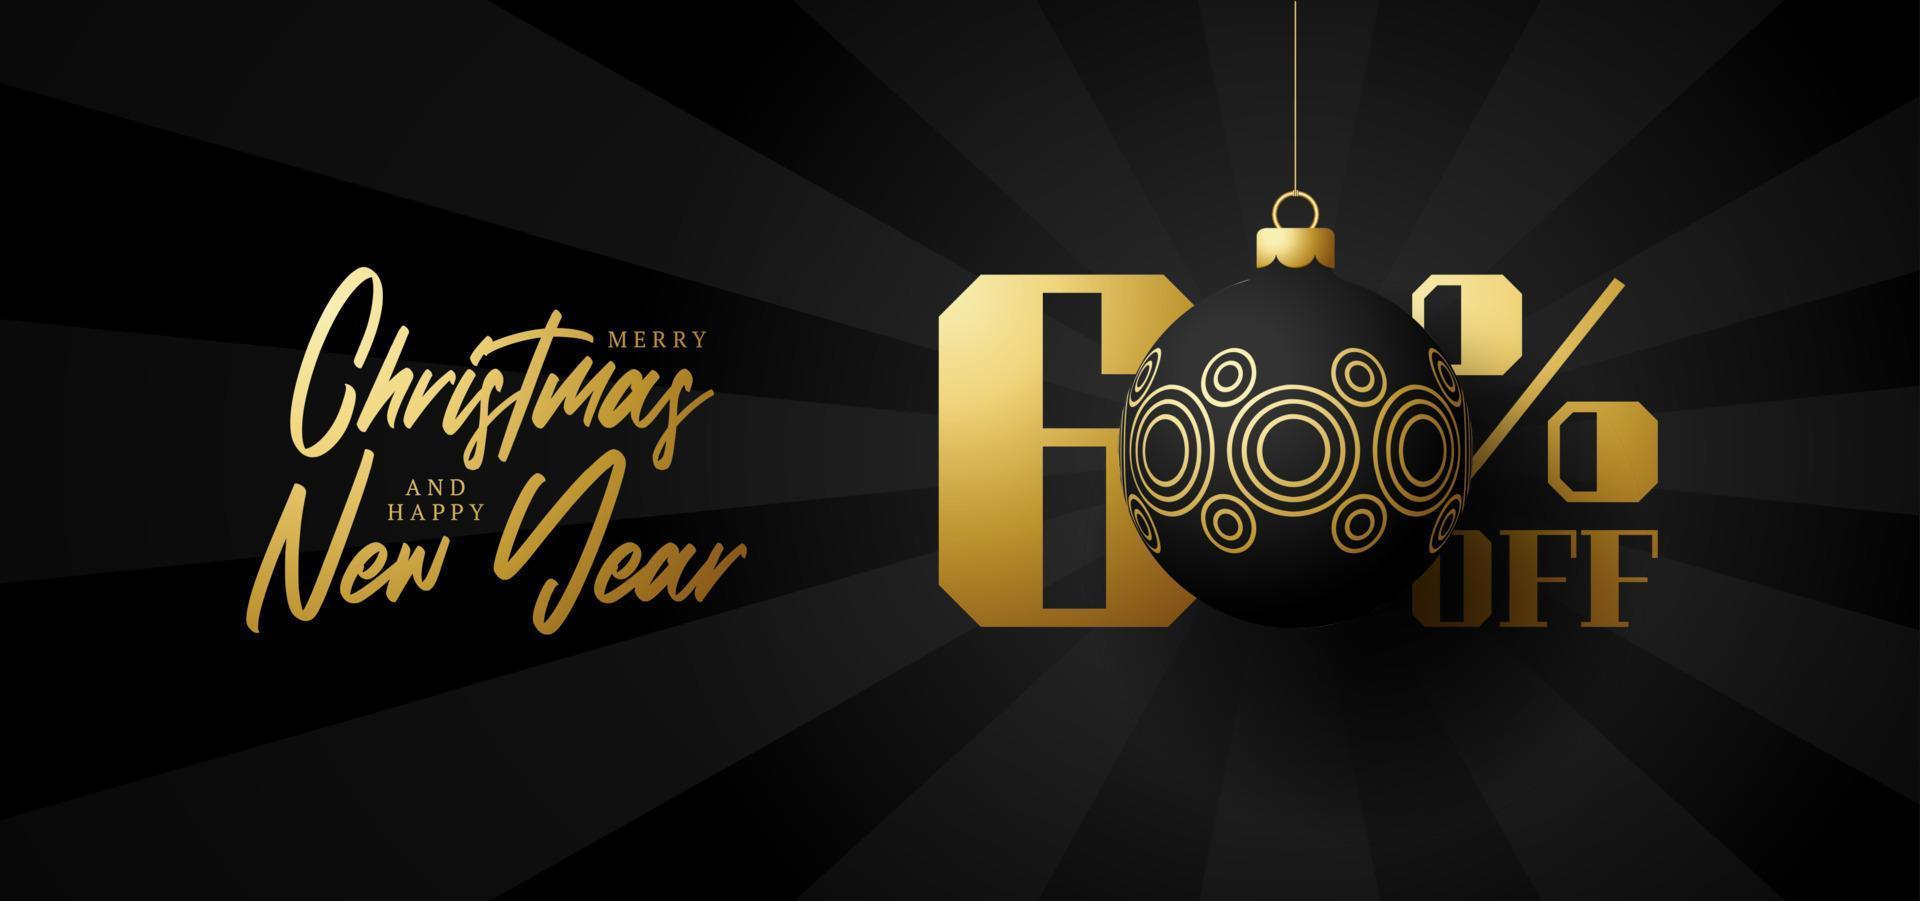 Merry christmas big Sale banner. Luxury Christmas Sale 60 percent off black royal banner template with decorated golden ball hang on a thread. Happy new year and xmas Vector illustration